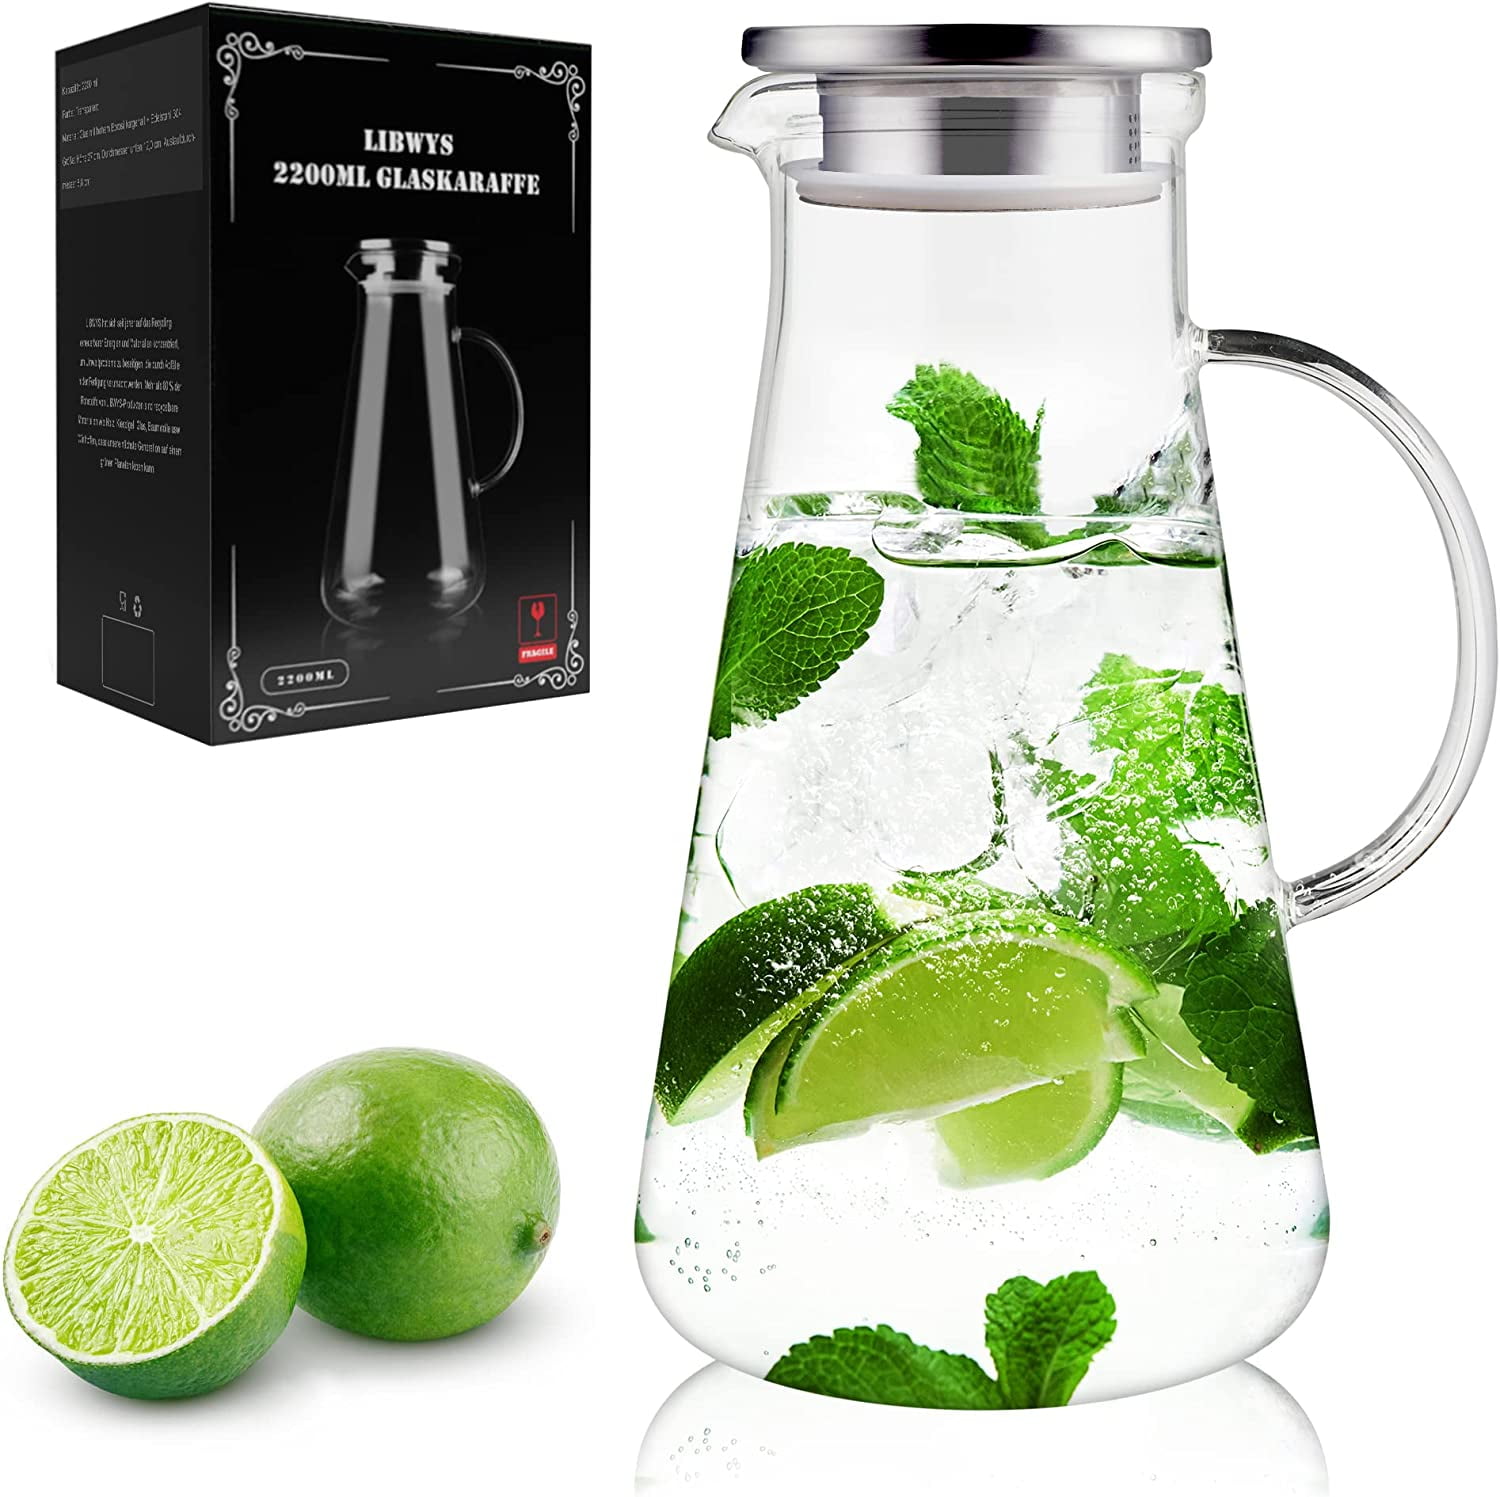 Breeze Glass Drink Water Pitcher with Stainless Steel Lid